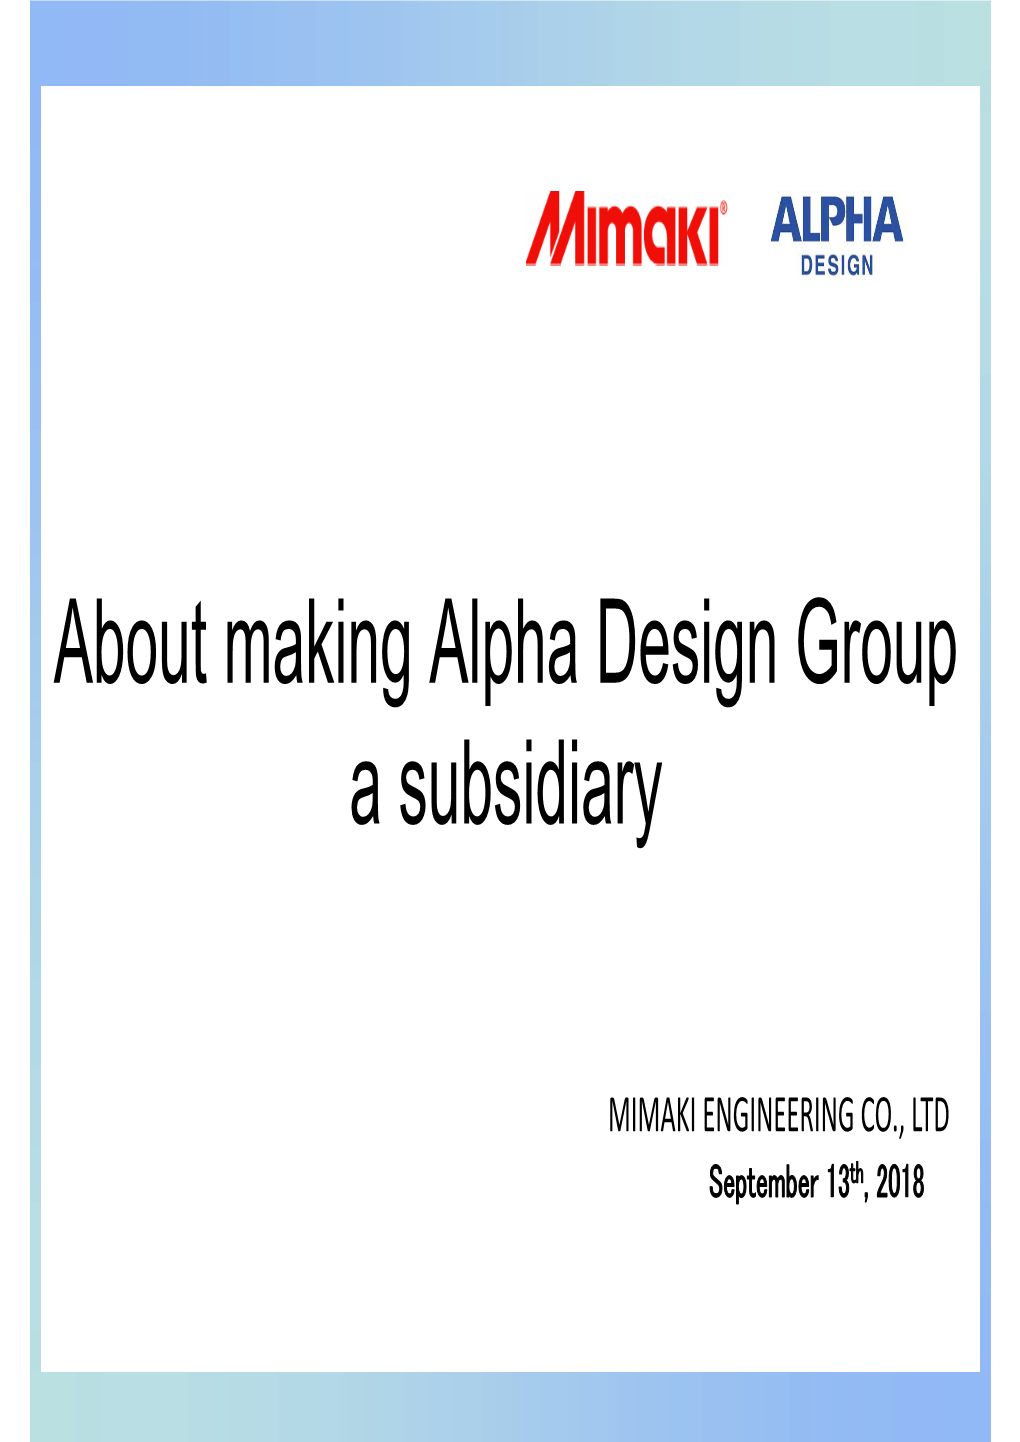 About Making Alpha Design Group a Subsidiary